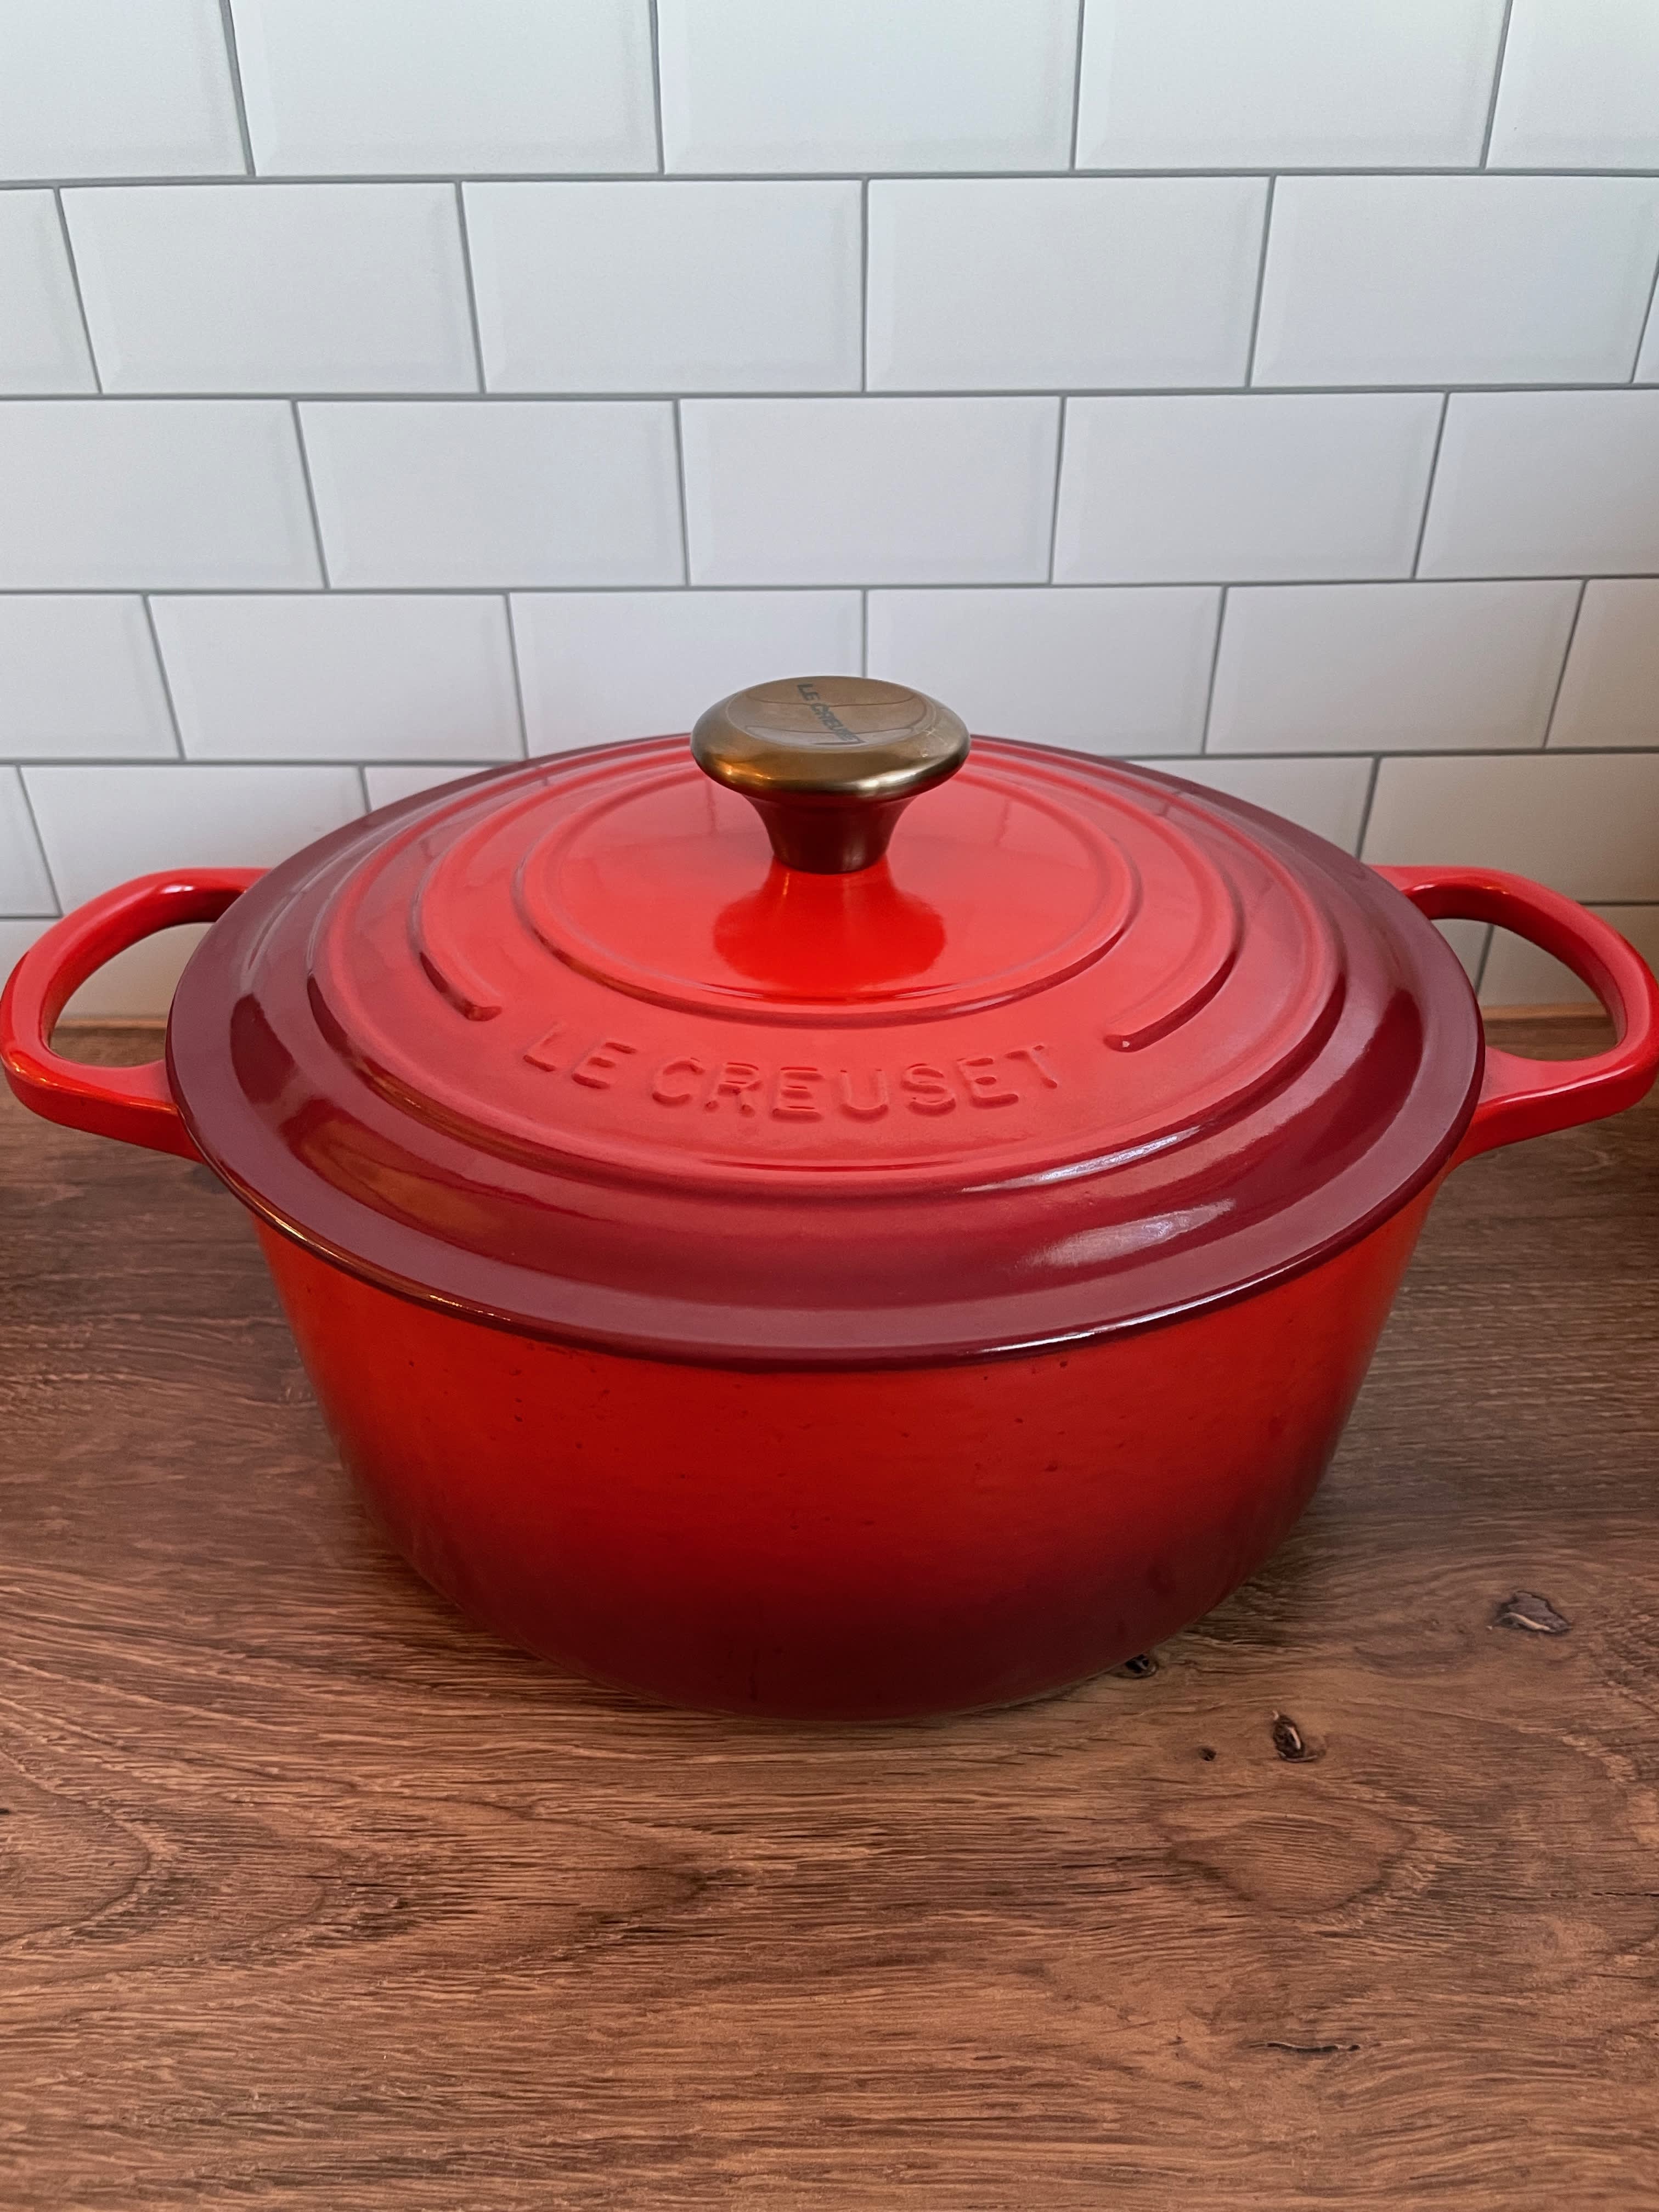 Le Creuset 3.5 Quart Round Dutch Oven — Review and Information. 